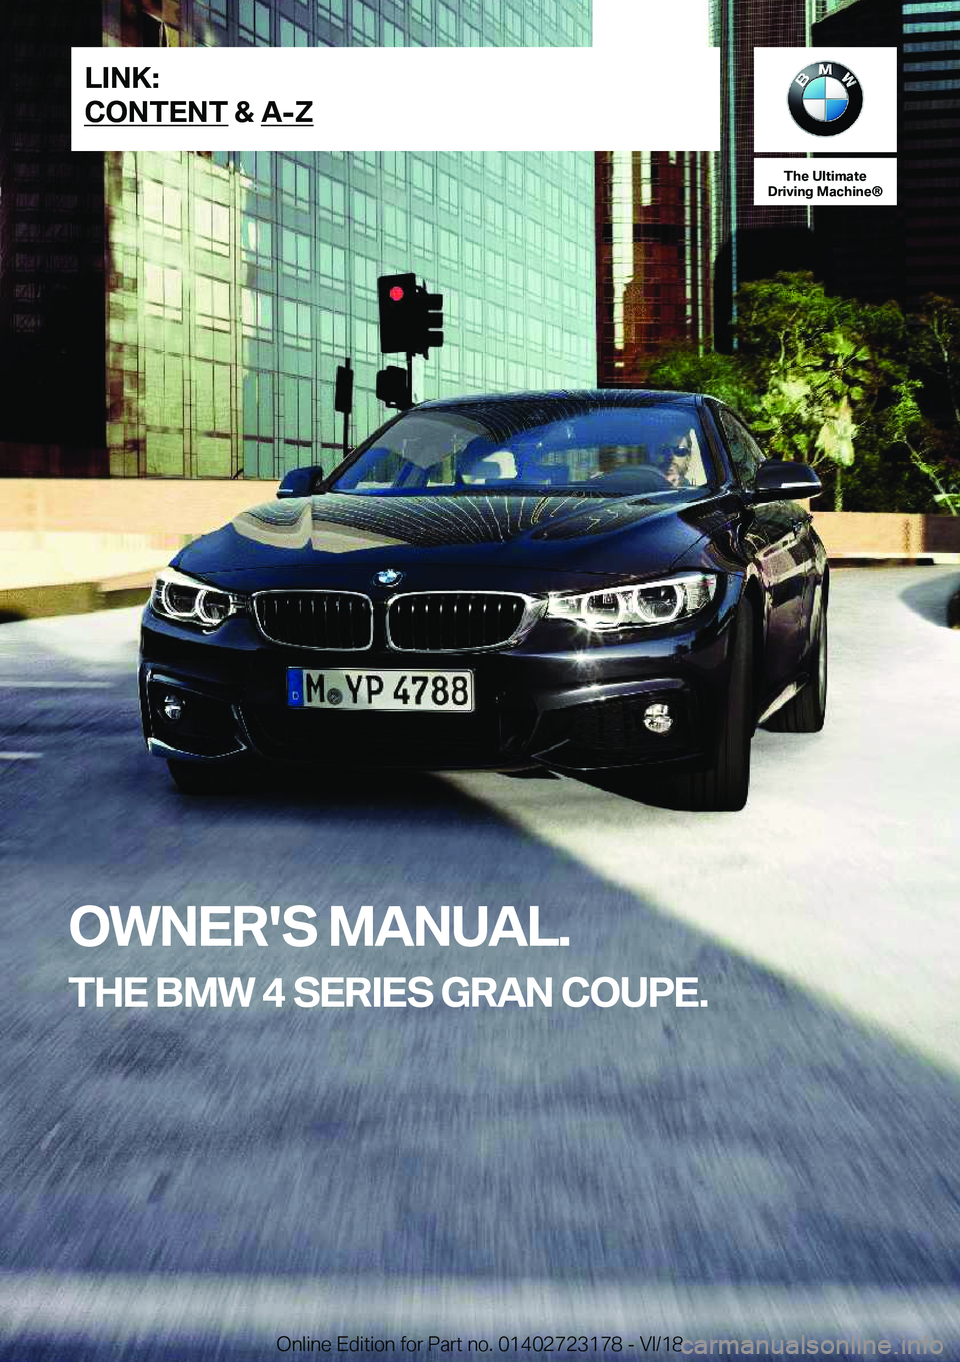 BMW 4 SERIES COUPE 2019  Owners Manual �T�h�e��U�l�t�i�m�a�t�e
�D�r�i�v�i�n�g��M�a�c�h�i�n�e�n
�O�W�N�E�R�'�S��M�A�N�U�A�L�.
�T�H�E��B�M�W��4��S�E�R�I�E�S��G�R�A�N��C�O�U�P�E�.�L�I�N�K�:
�C�O�N�T�E�N�T��&��A�-�Z�O�n�l�i�n�e�